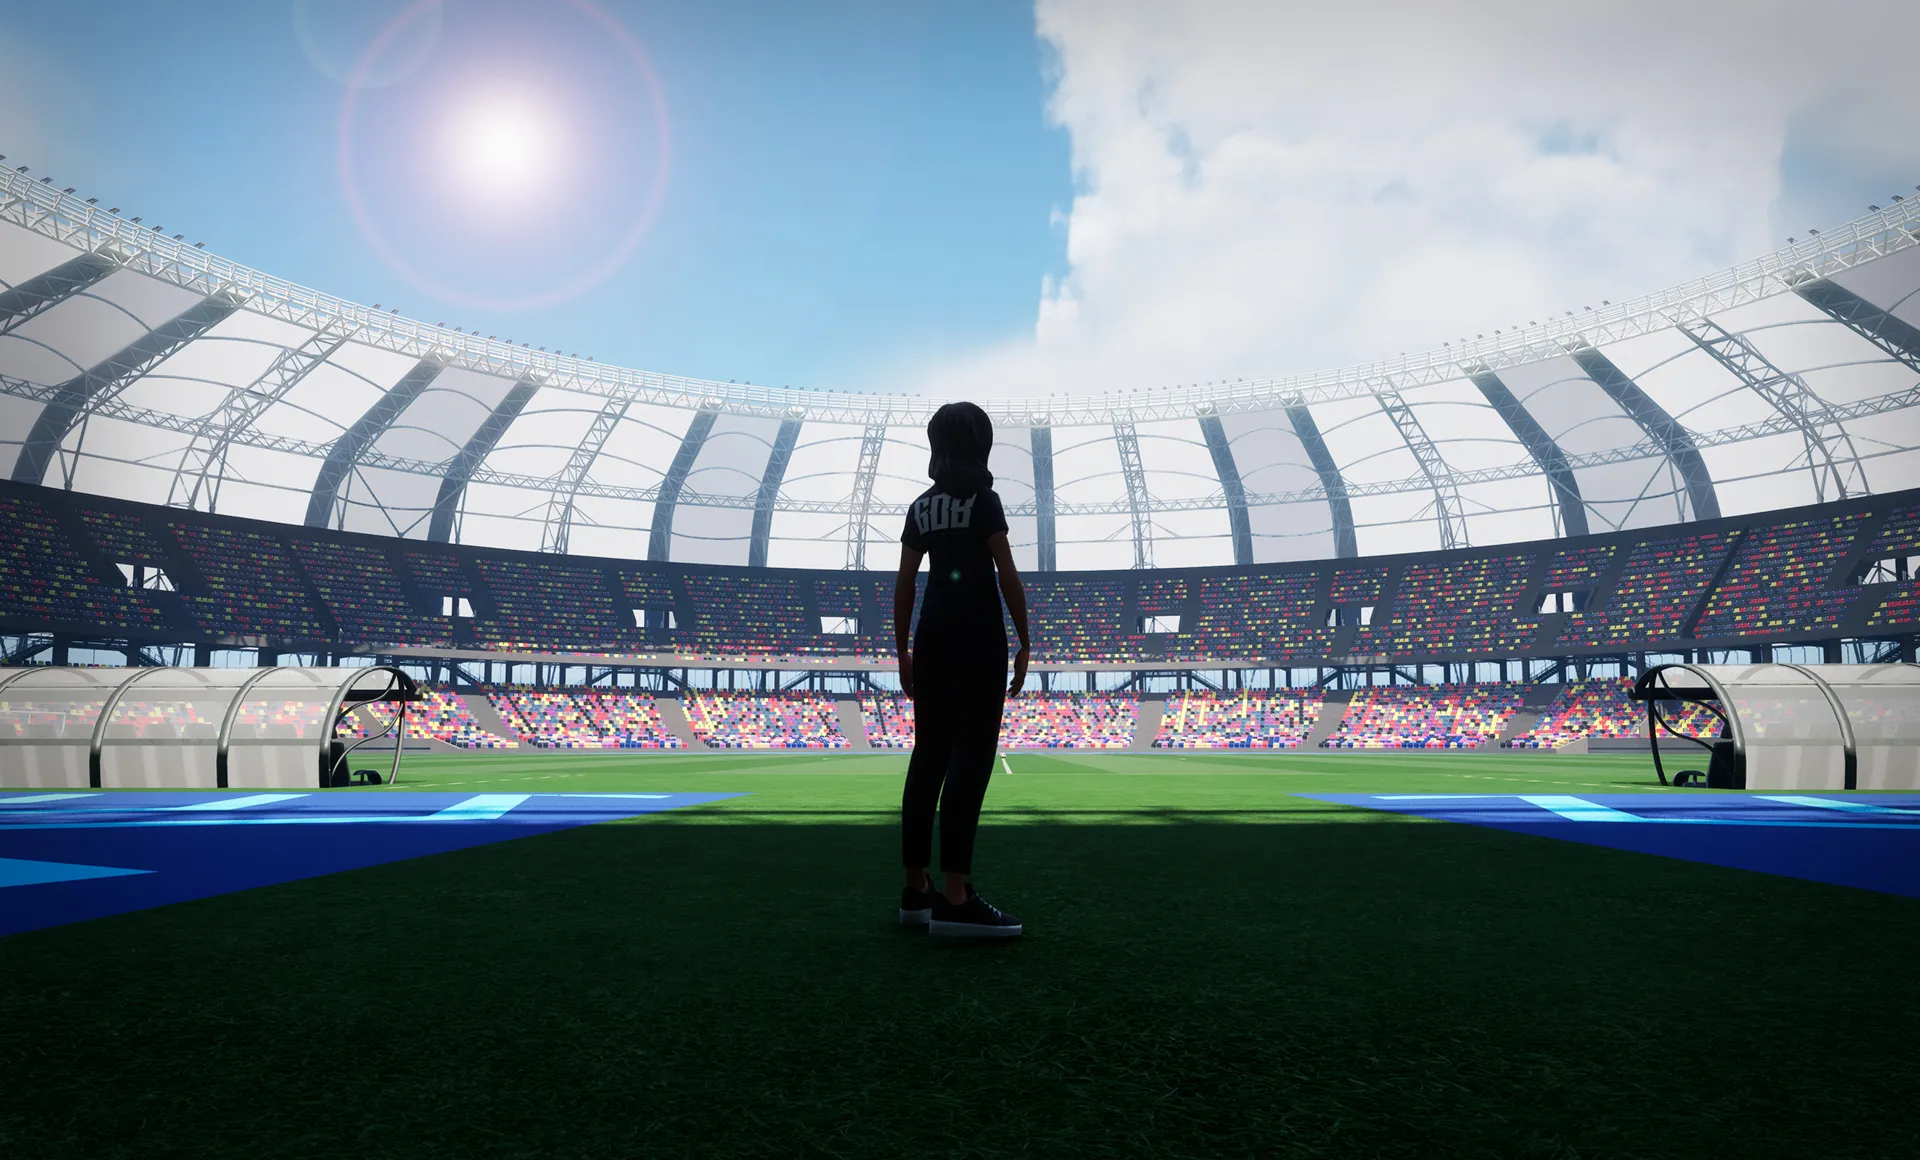 Back view of a female avatar overlooking the Estadio Único Madre de Ciudades in the Metaverse